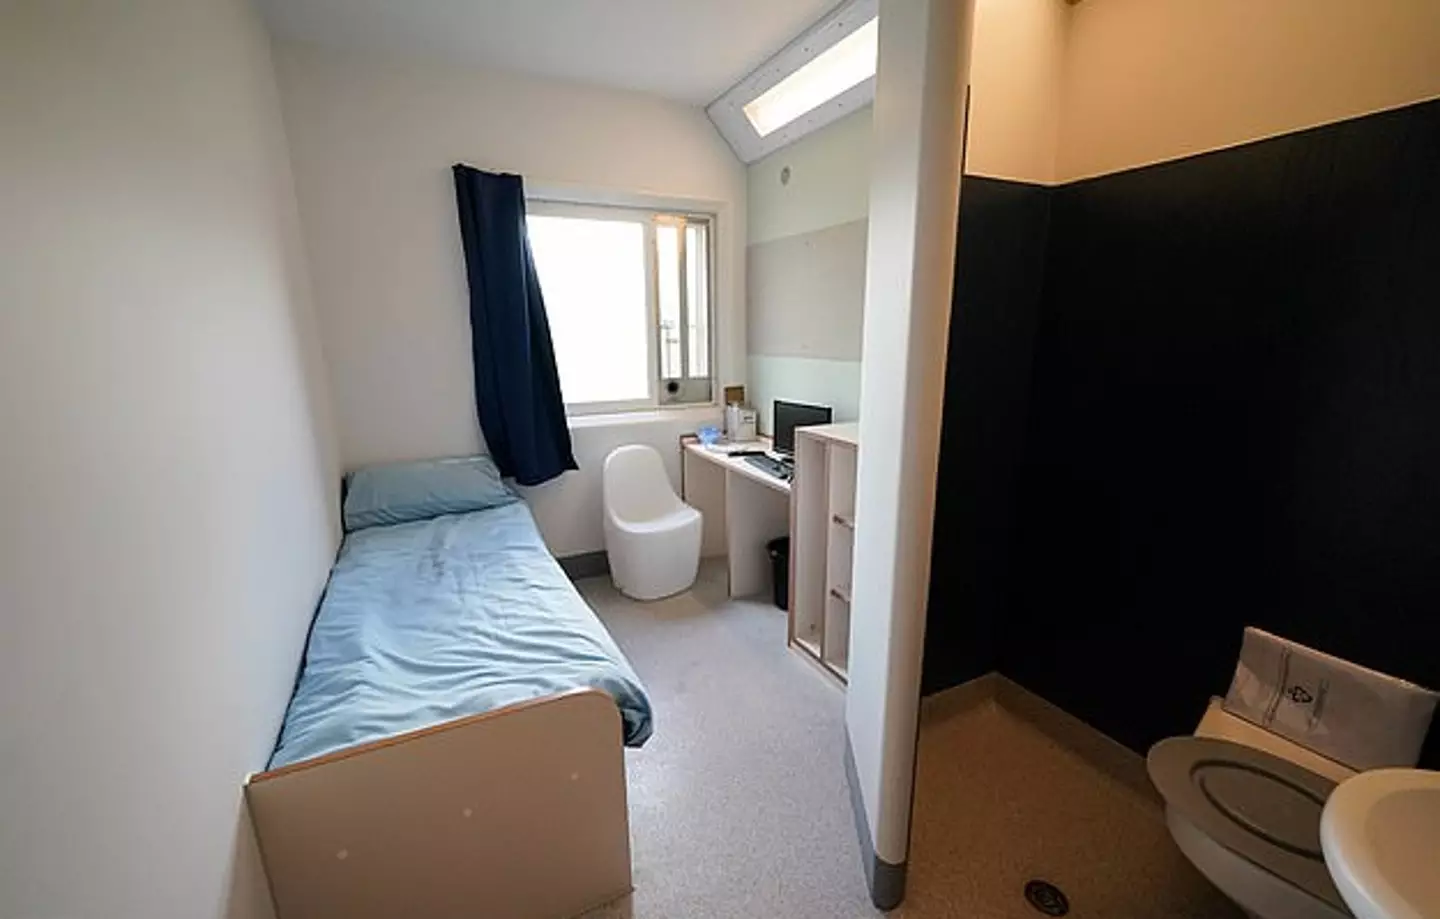 A cell in HMP Fosse Way.